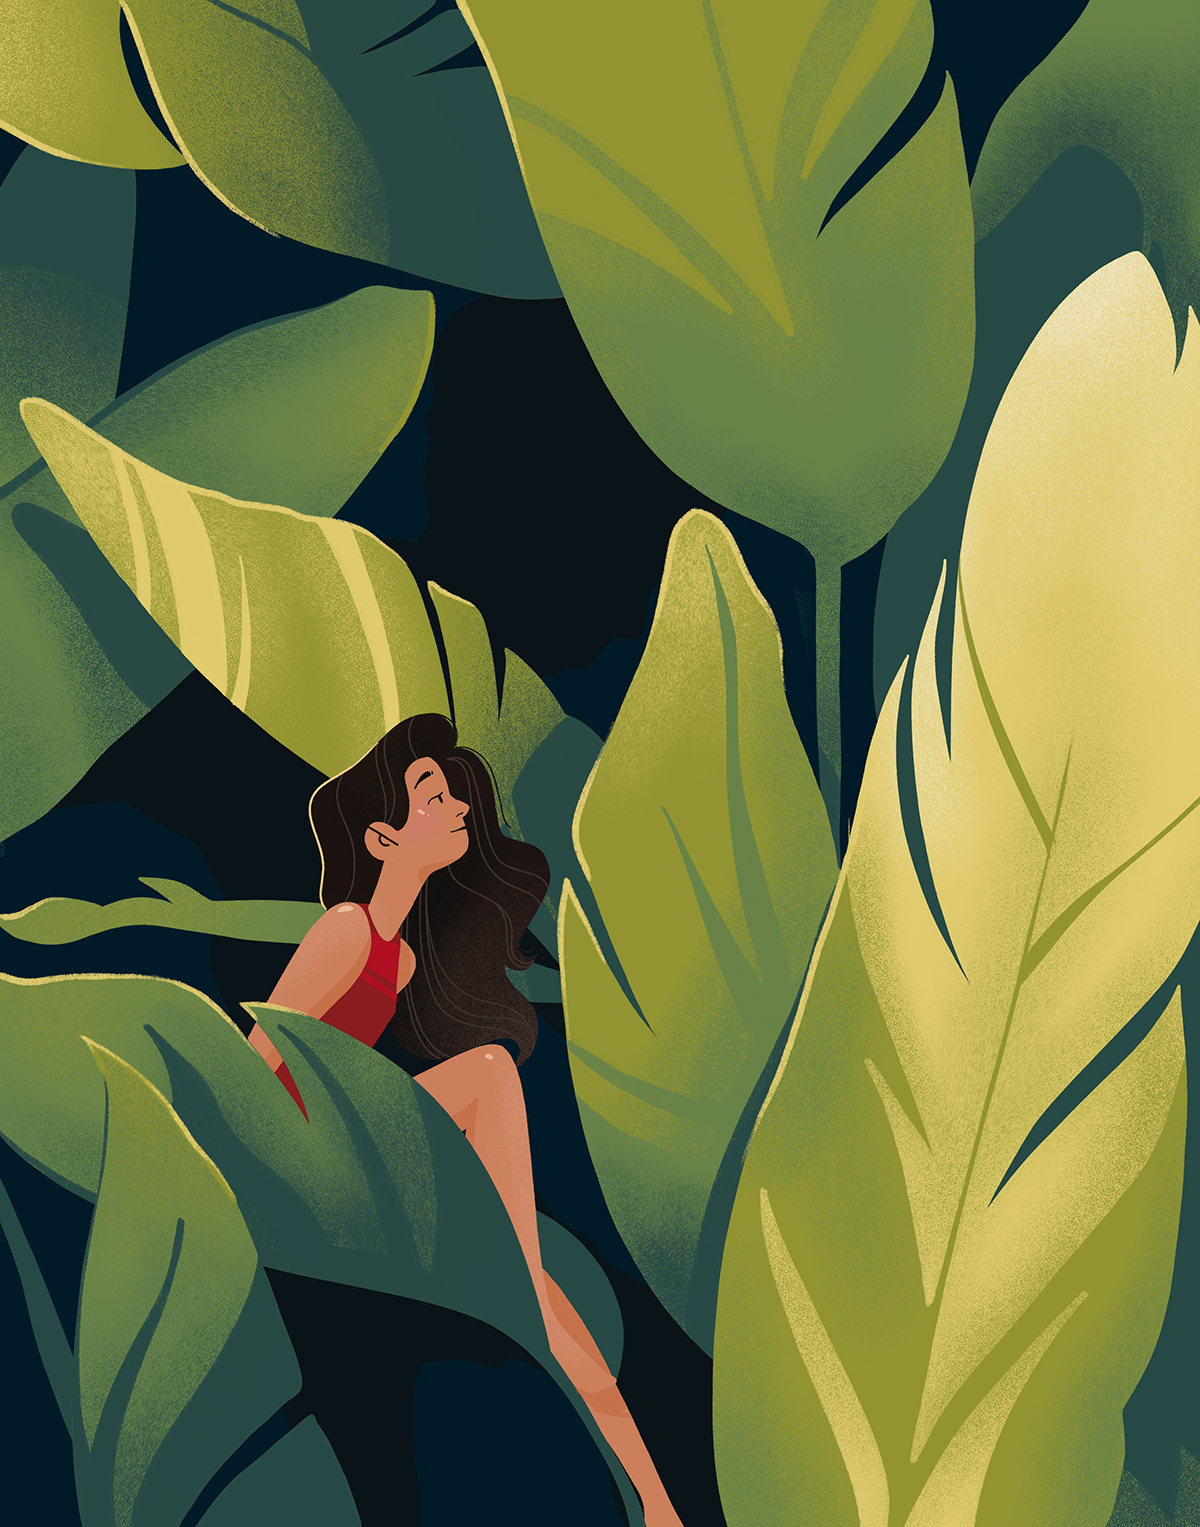 Graphic illustration of large green fronds, a girl in a red tank top sits in one of the folds of the leaves